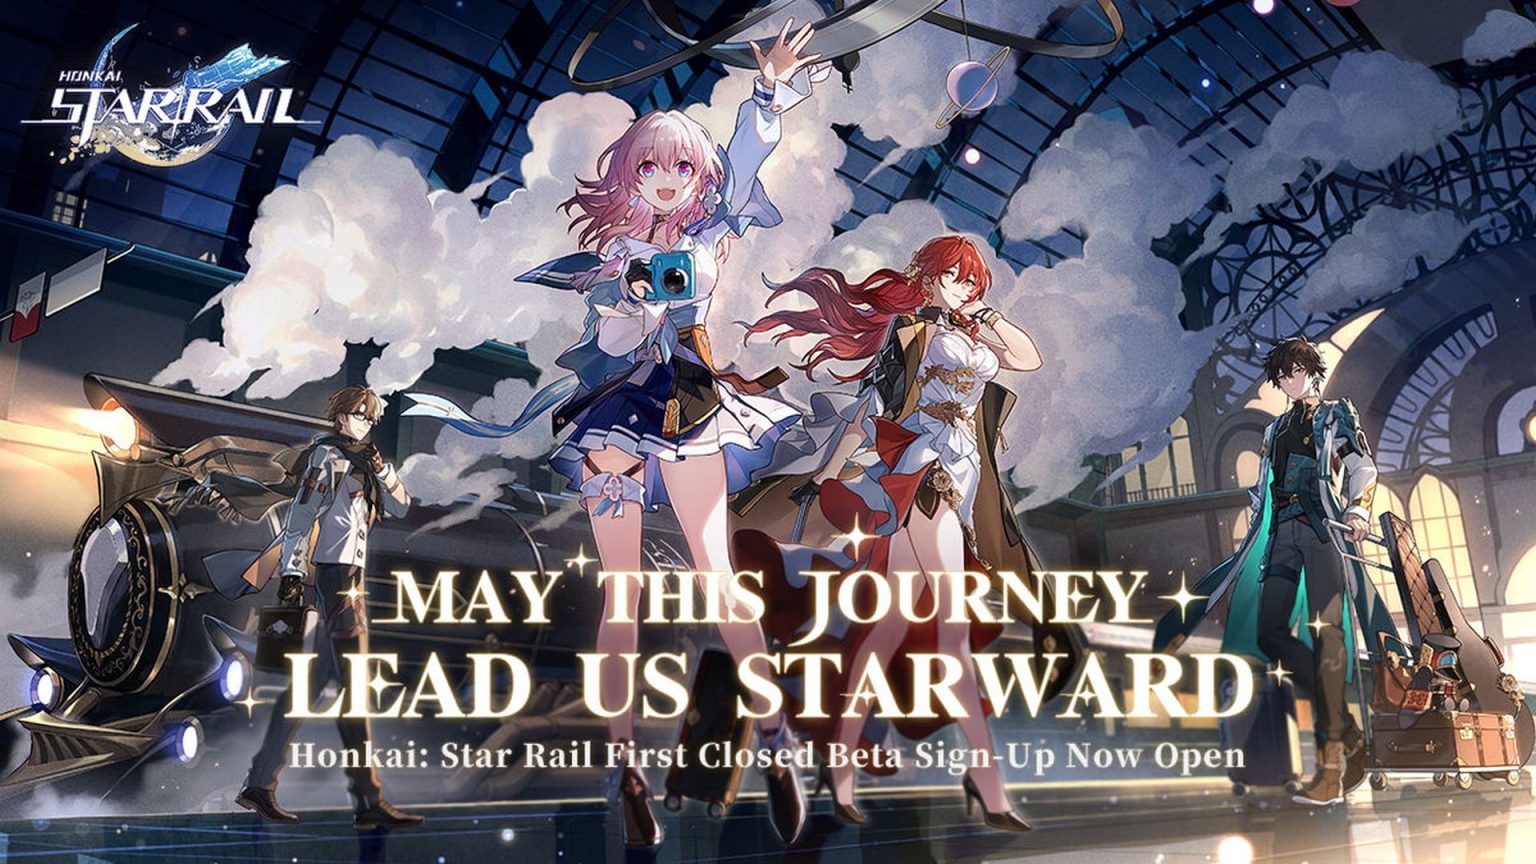 Honkai: Star Rail Announced – New Strategy RPG Coming to PC, iOS, and